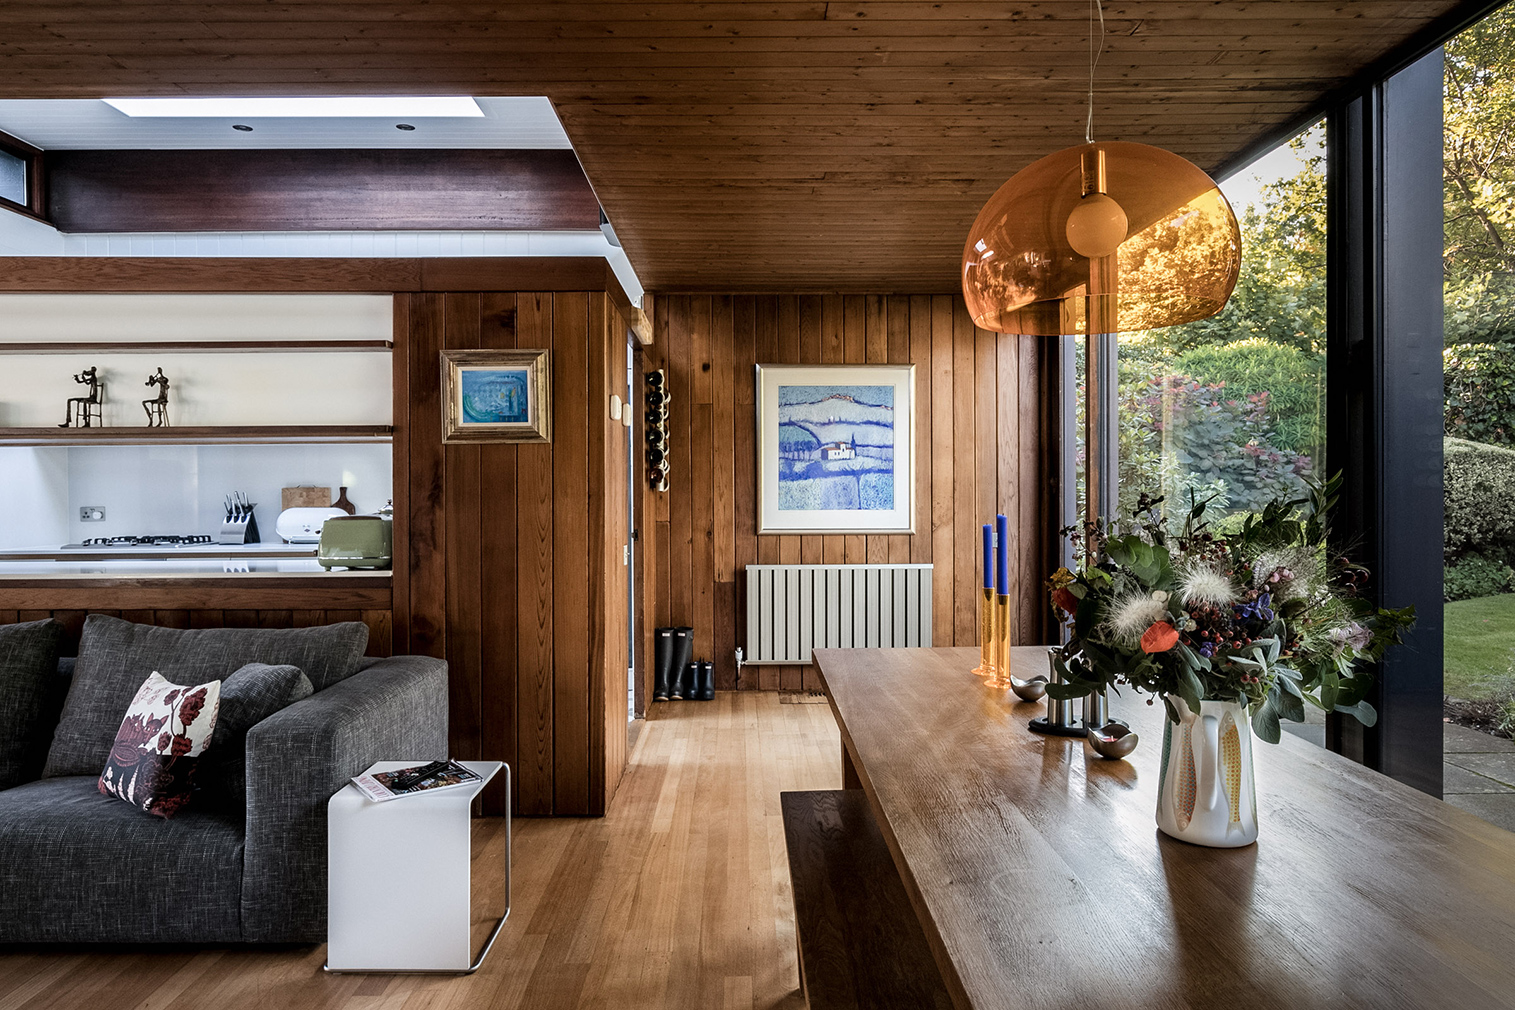 Property of the week: a 1960s Foggo & Thomas home in London